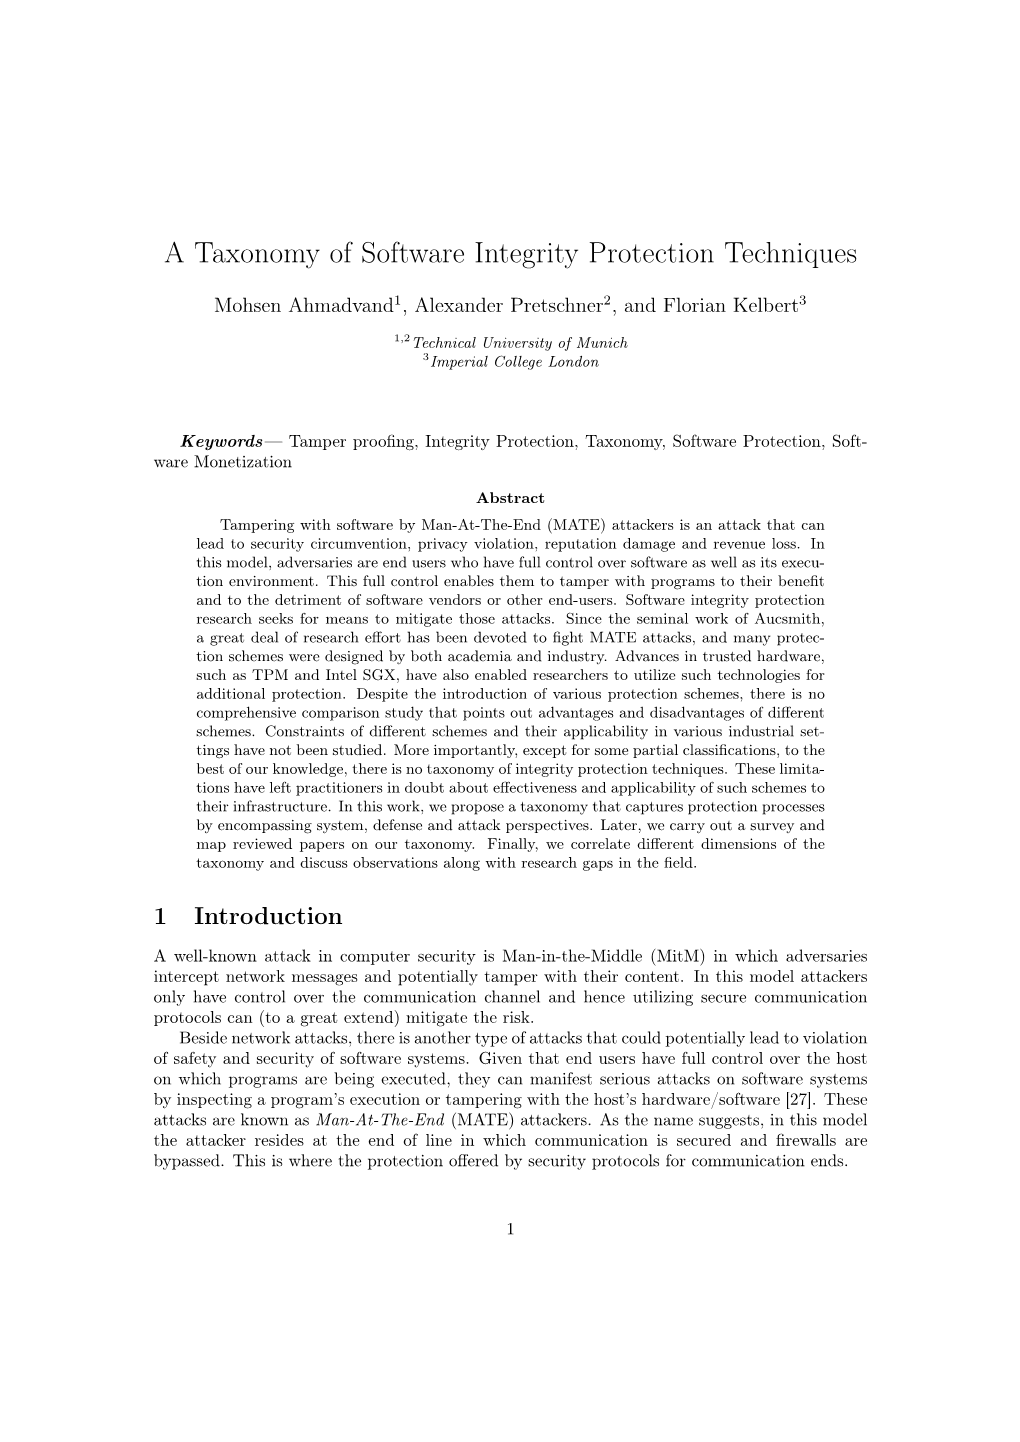 A Taxonomy of Software Integrity Protection Techniques